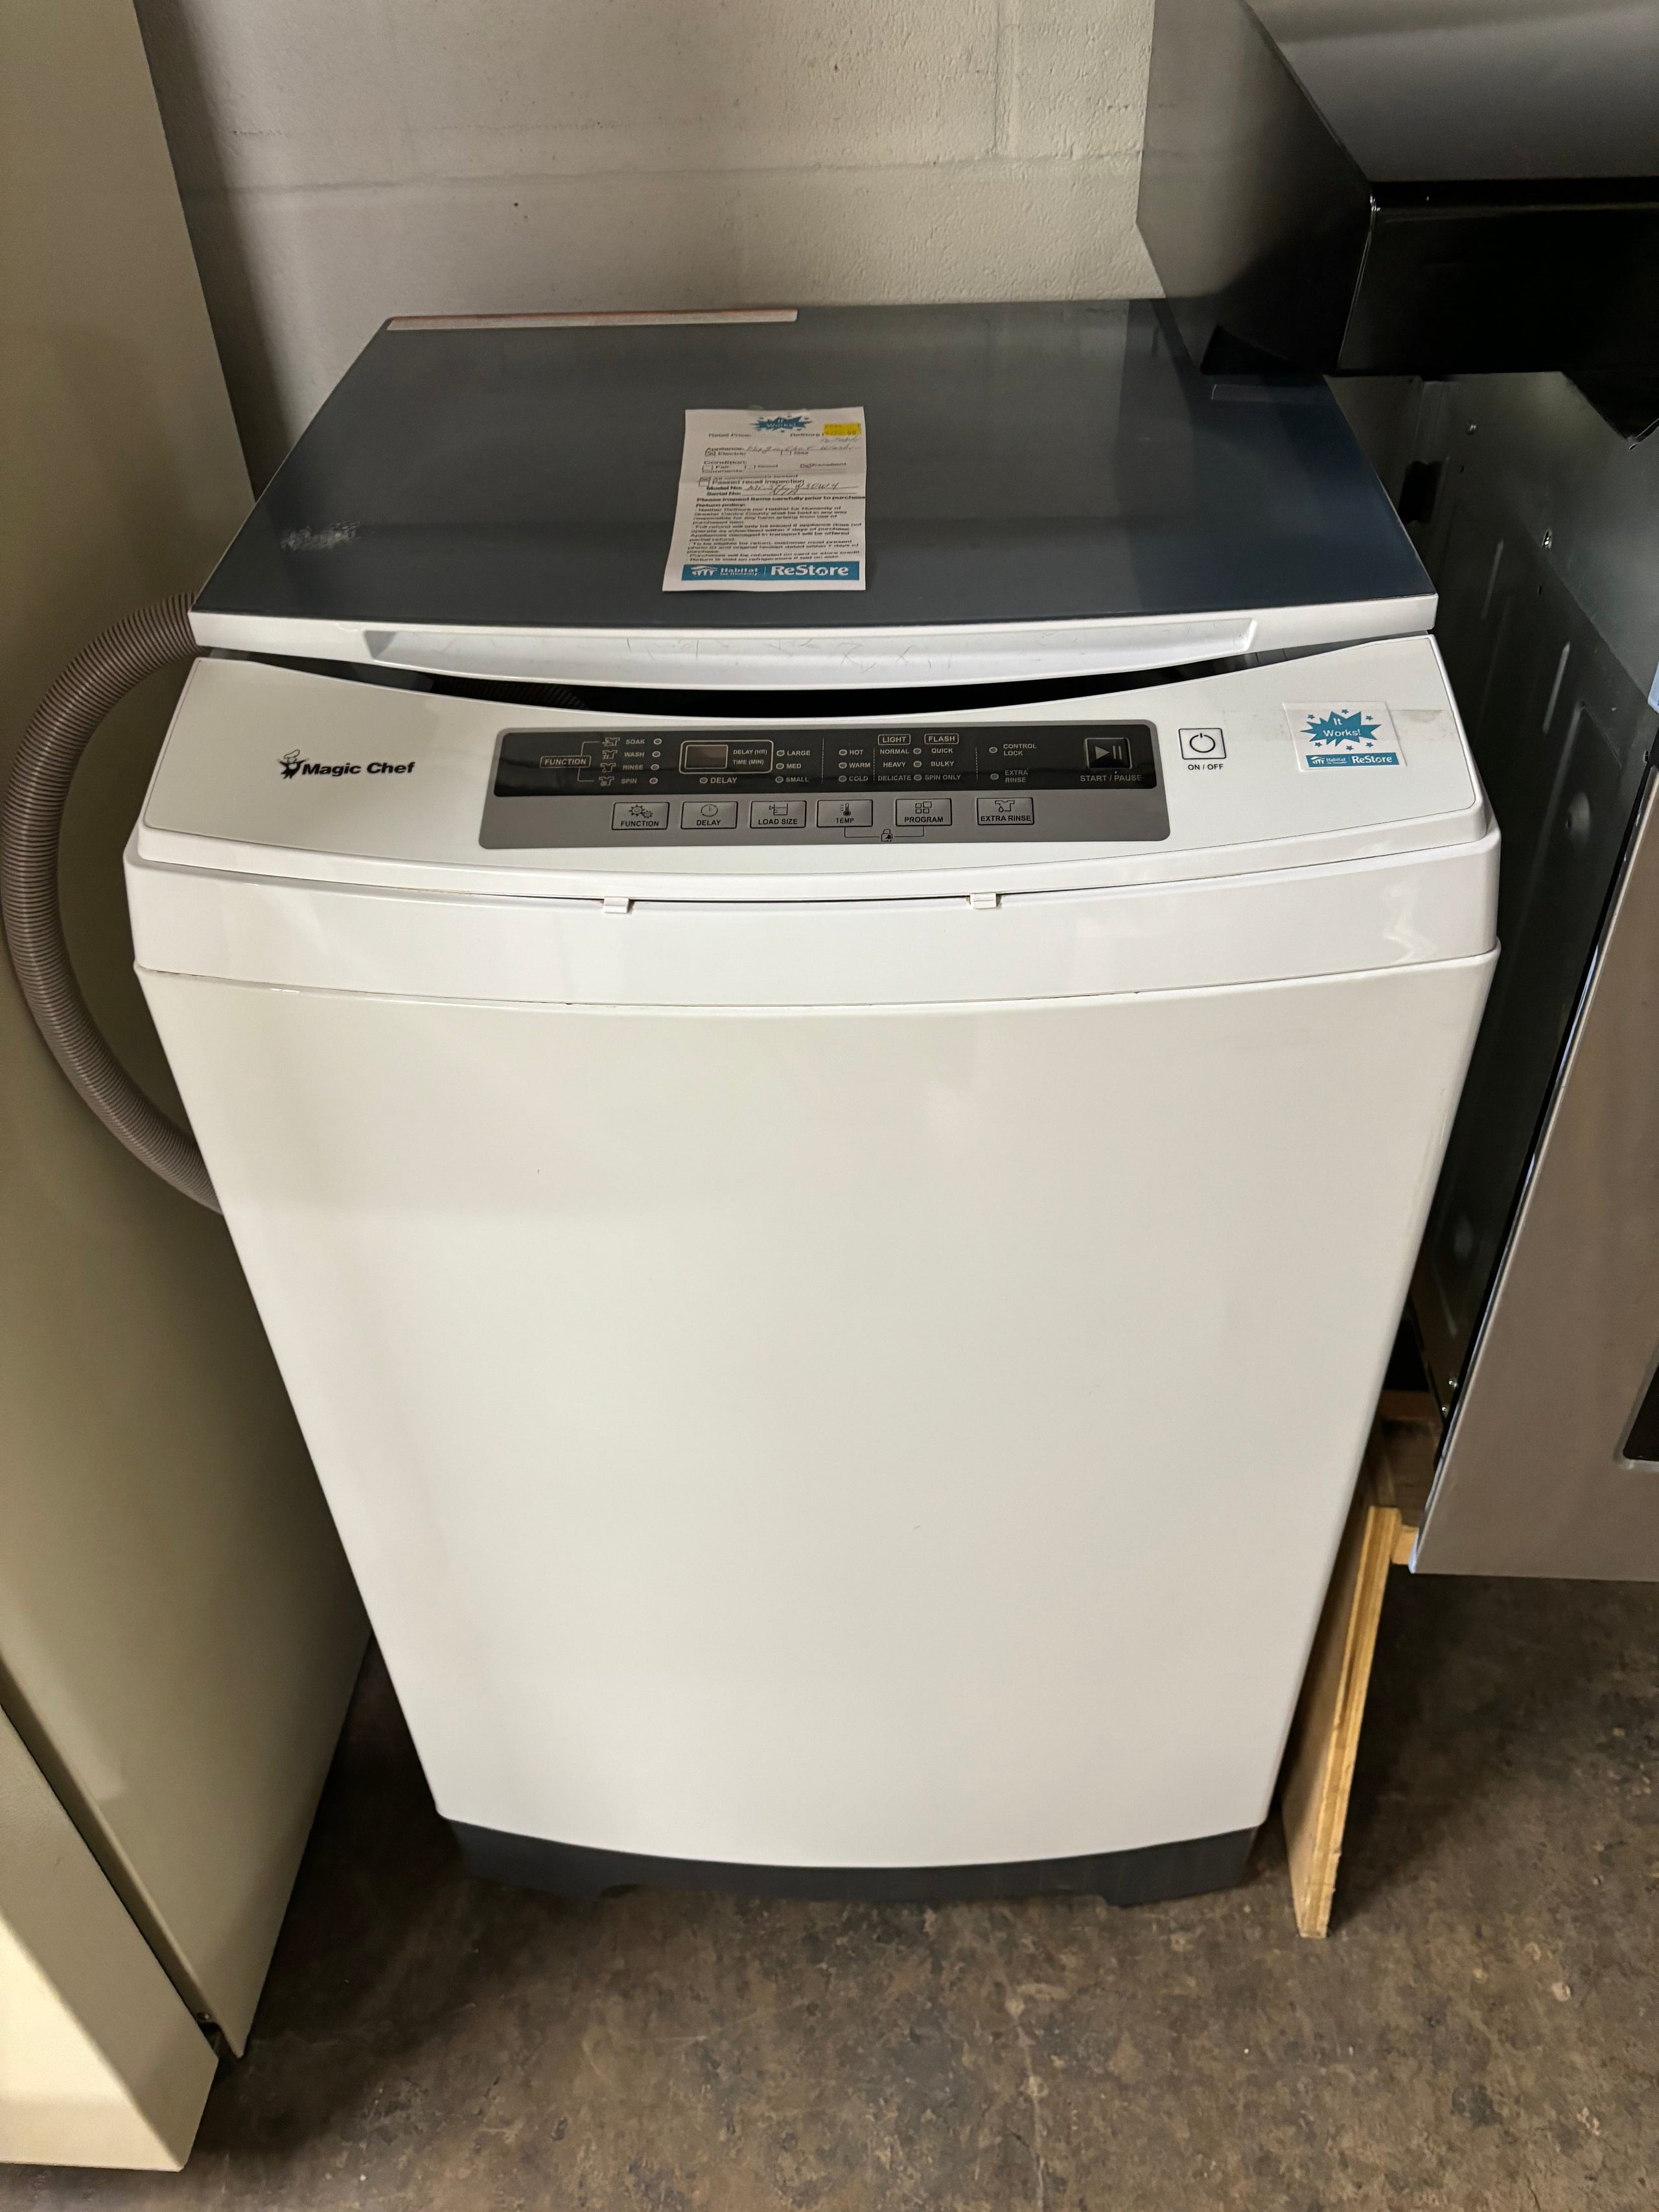 Magic Chef Portable Washing Machine 01-WAS-MGCH  Habitat for Humanity of  Greater Centre County ReStore